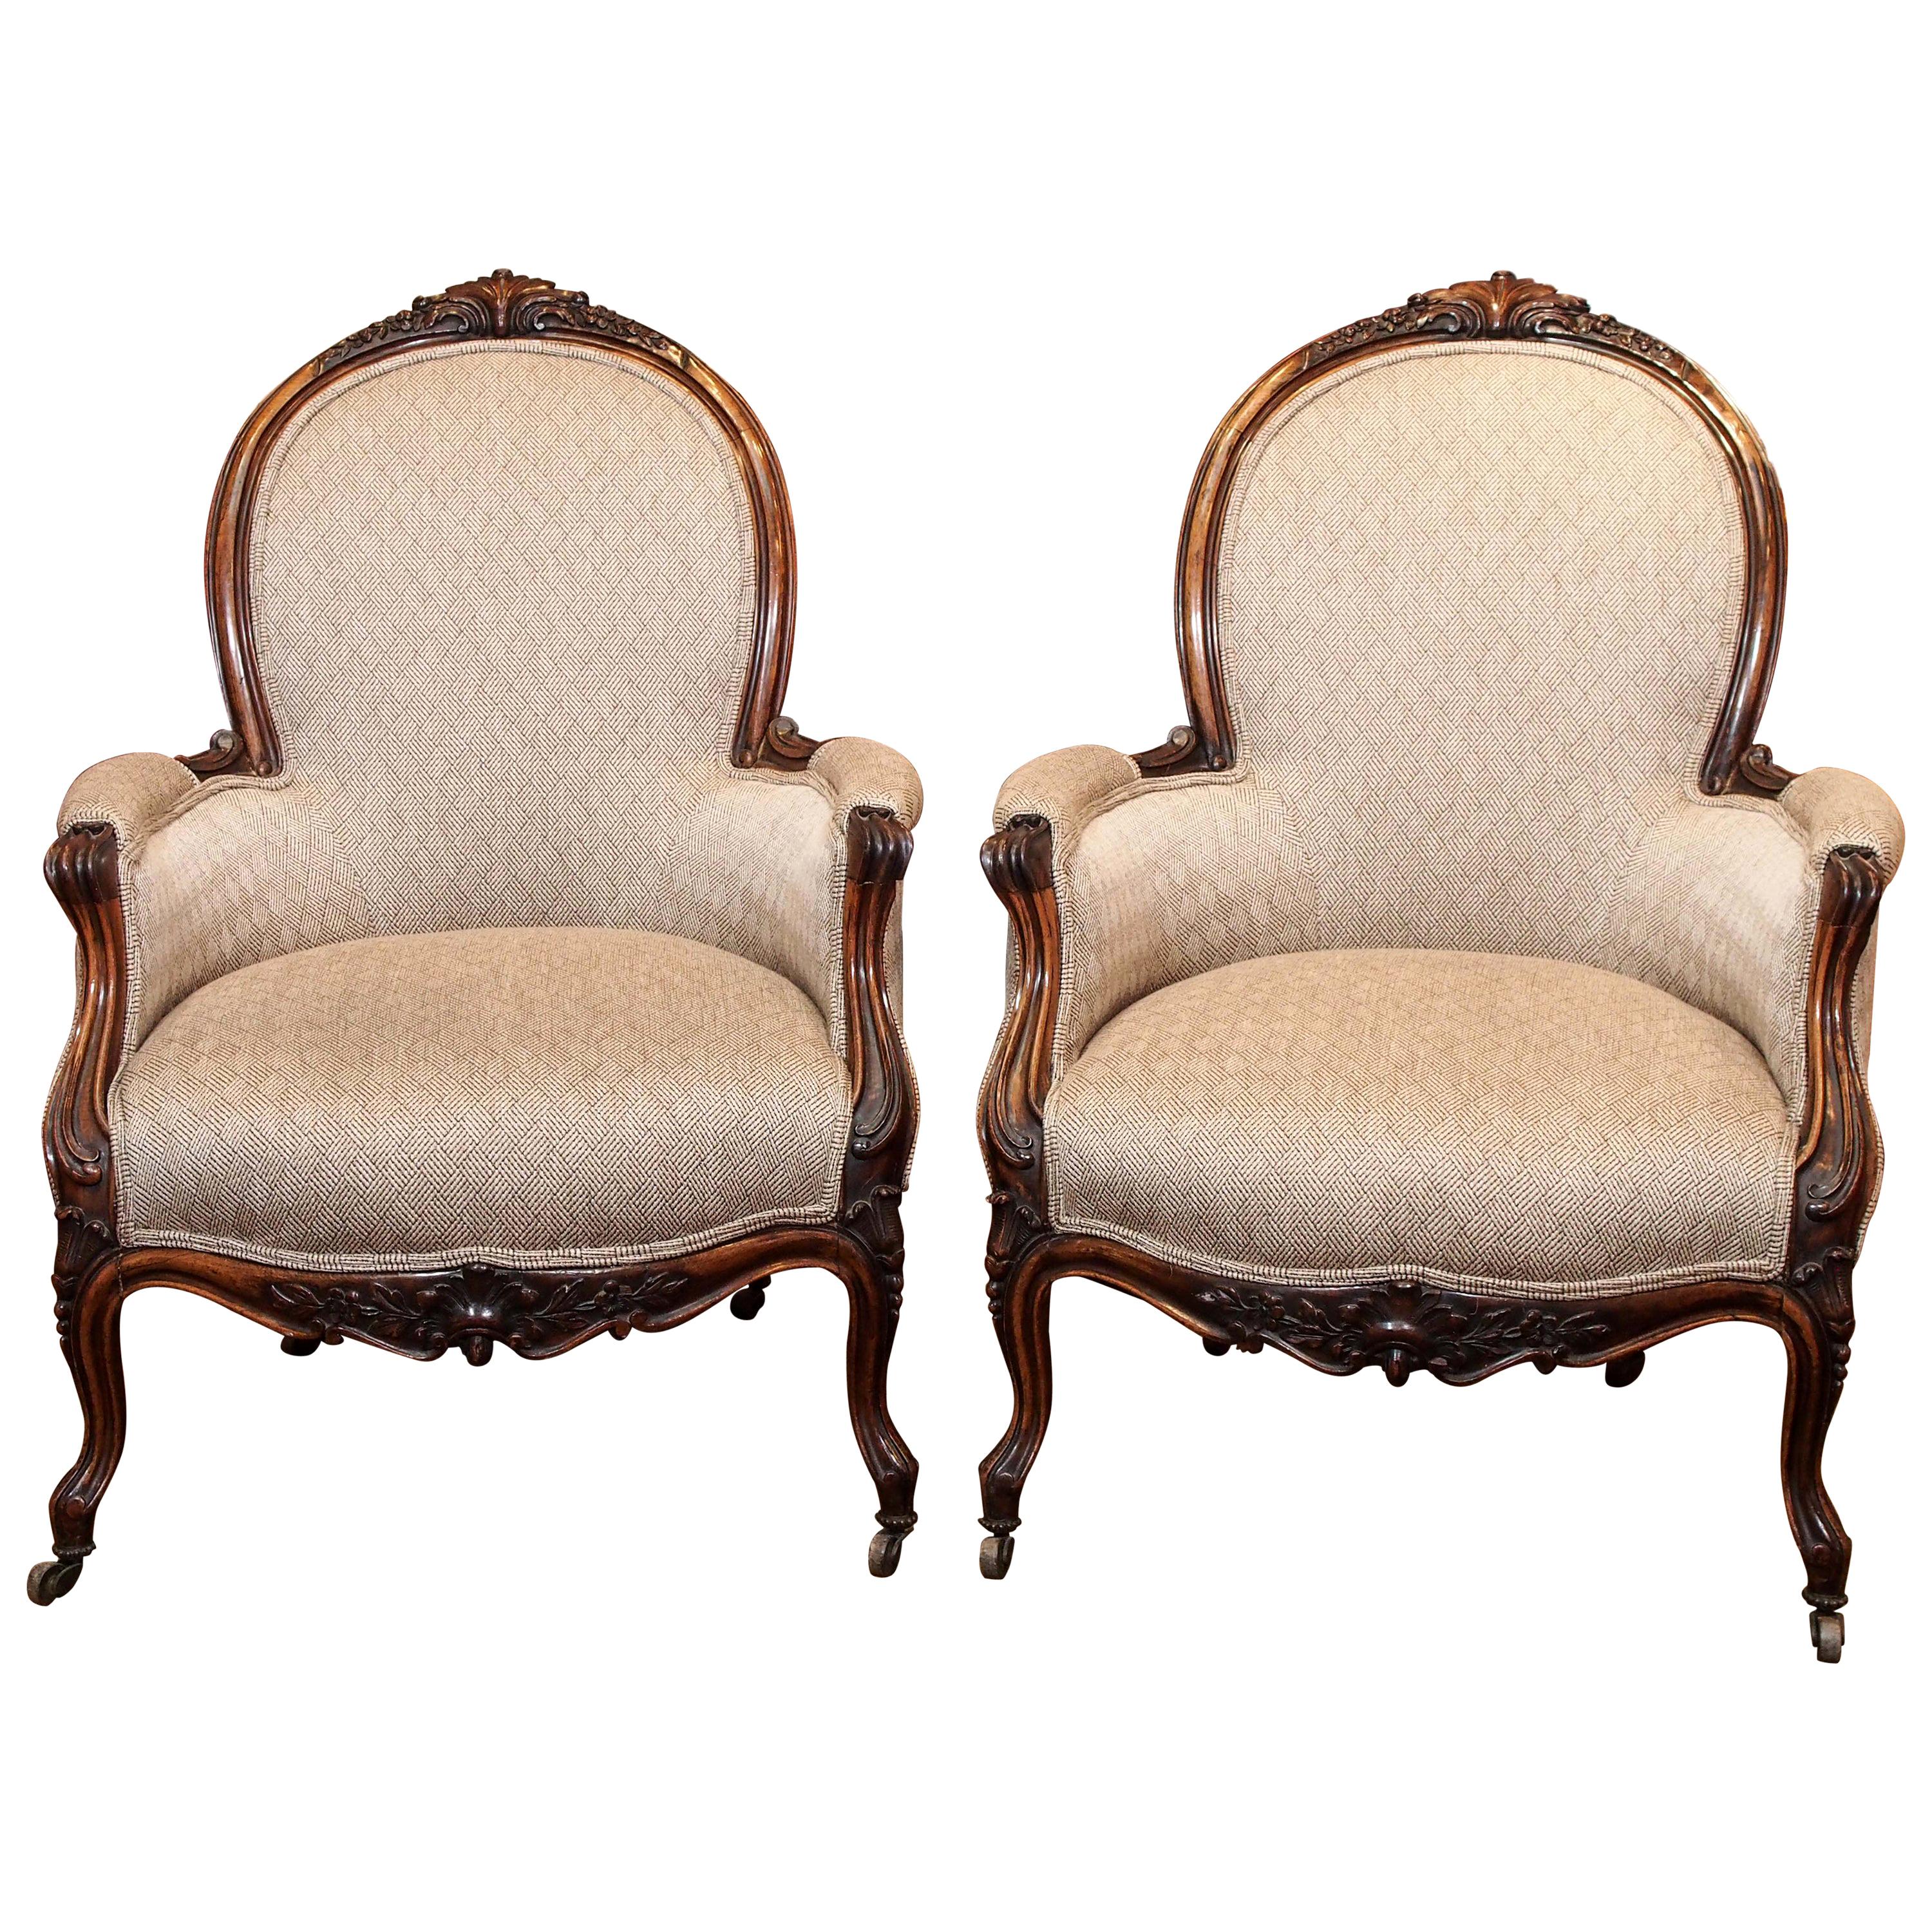 Pair of Antique American Bergeres For Sale